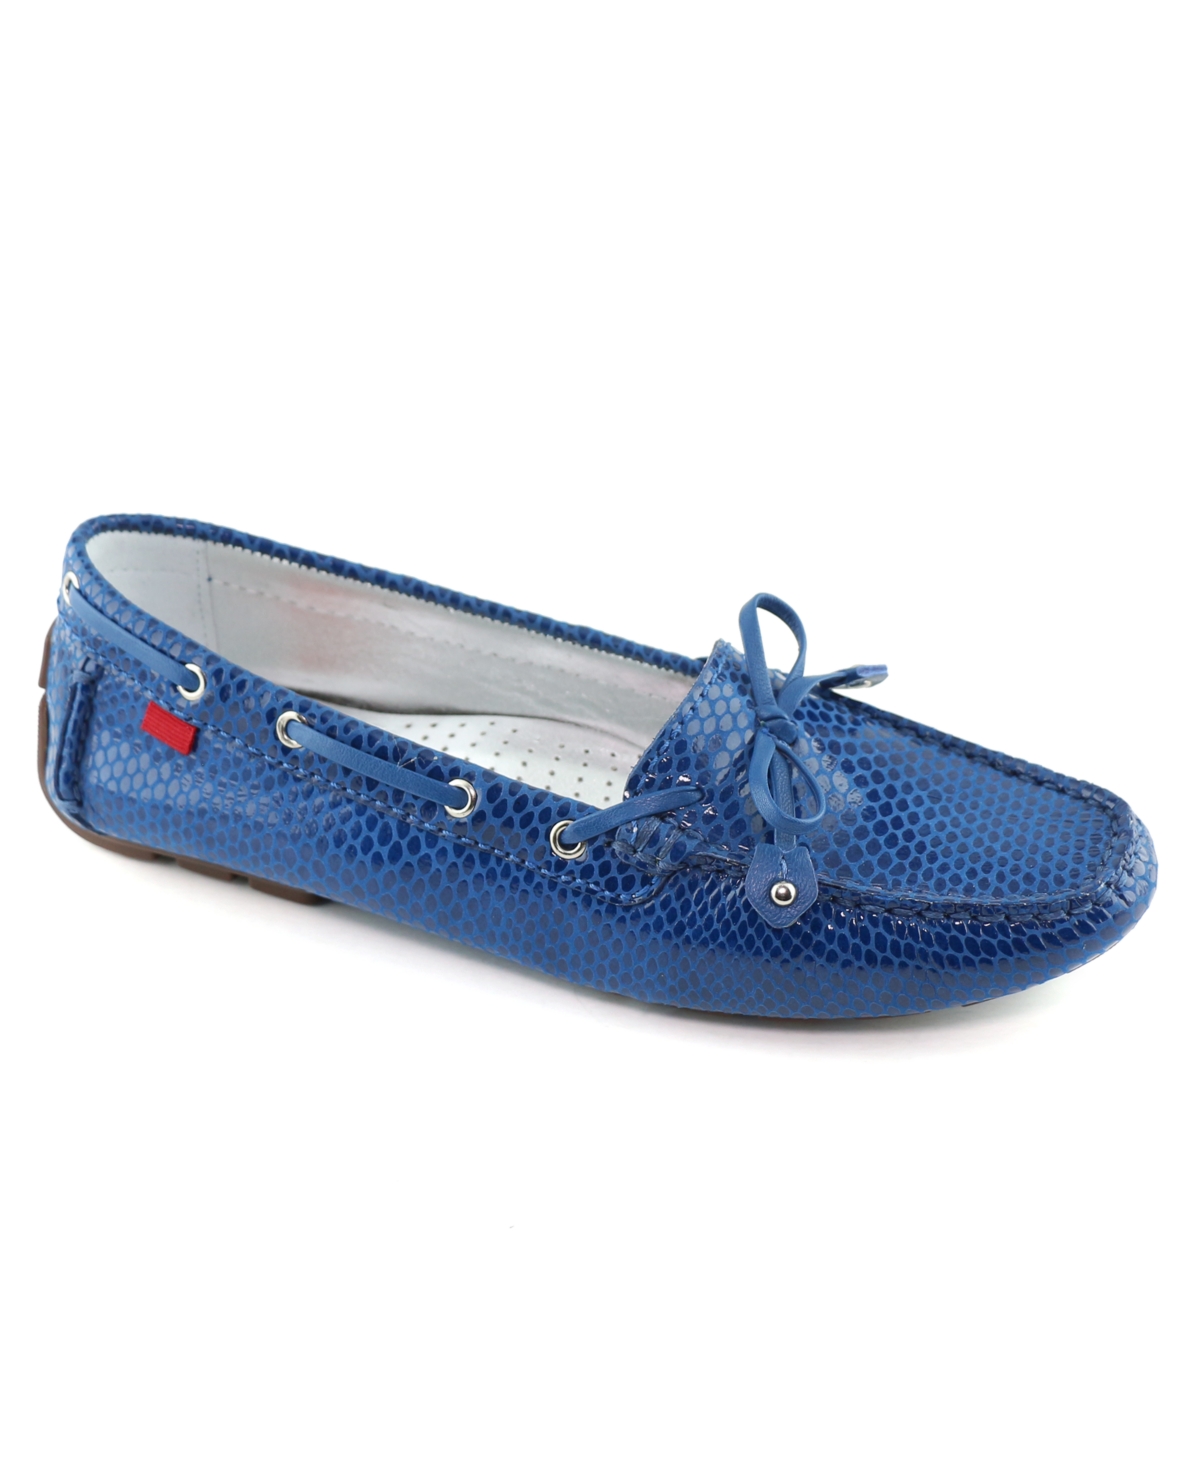 Women's Cypress Hill Comfort Loafers - Pepper Red Grainy